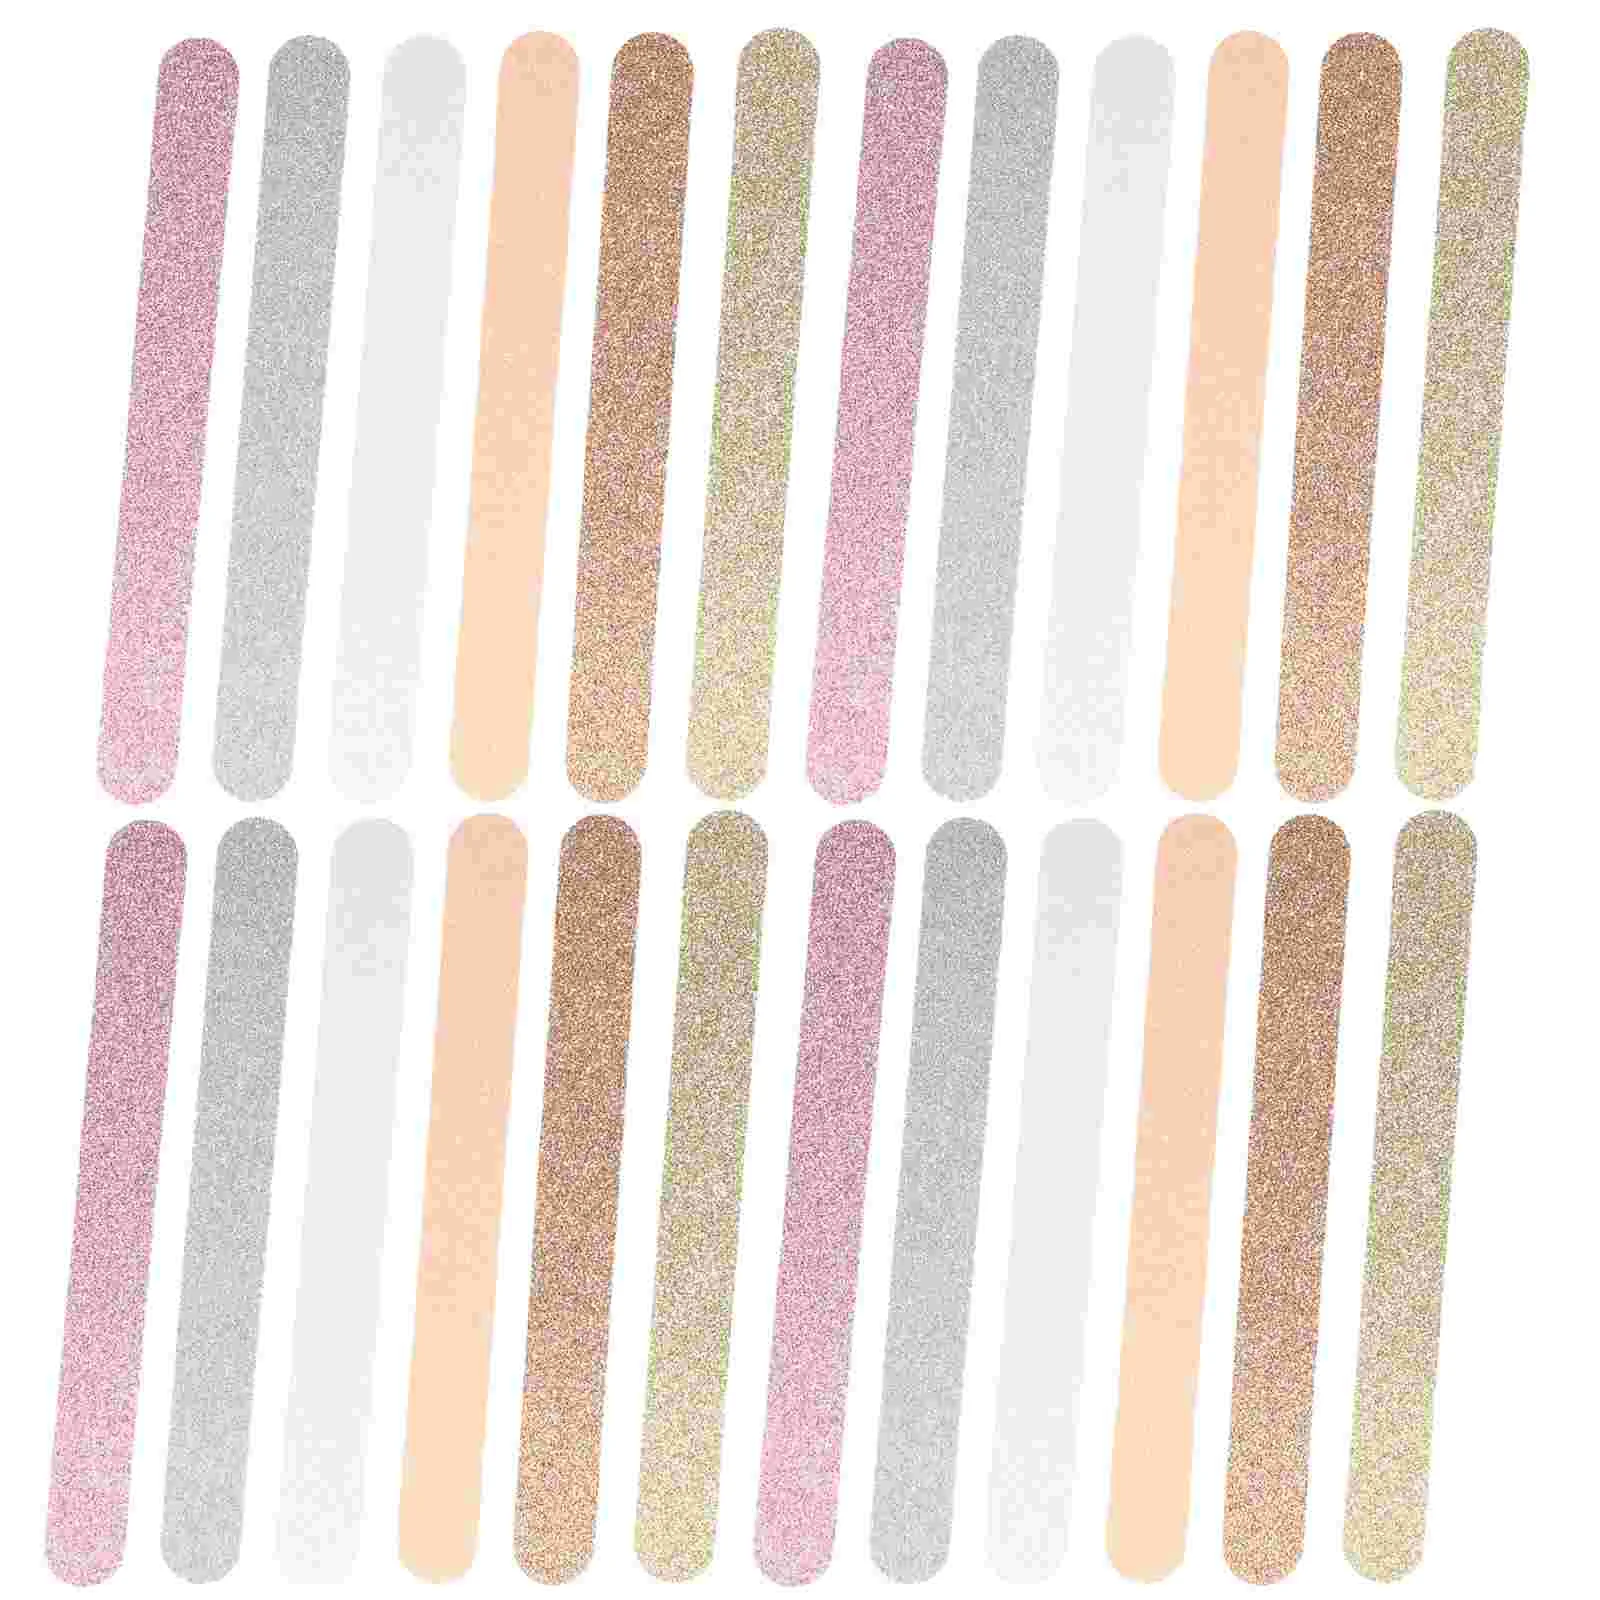 

Nail File Files Manicure Buffers Professionalnails Buffer Double Supplies Tools Strips Boards Emery Sided Pedicure Polishing